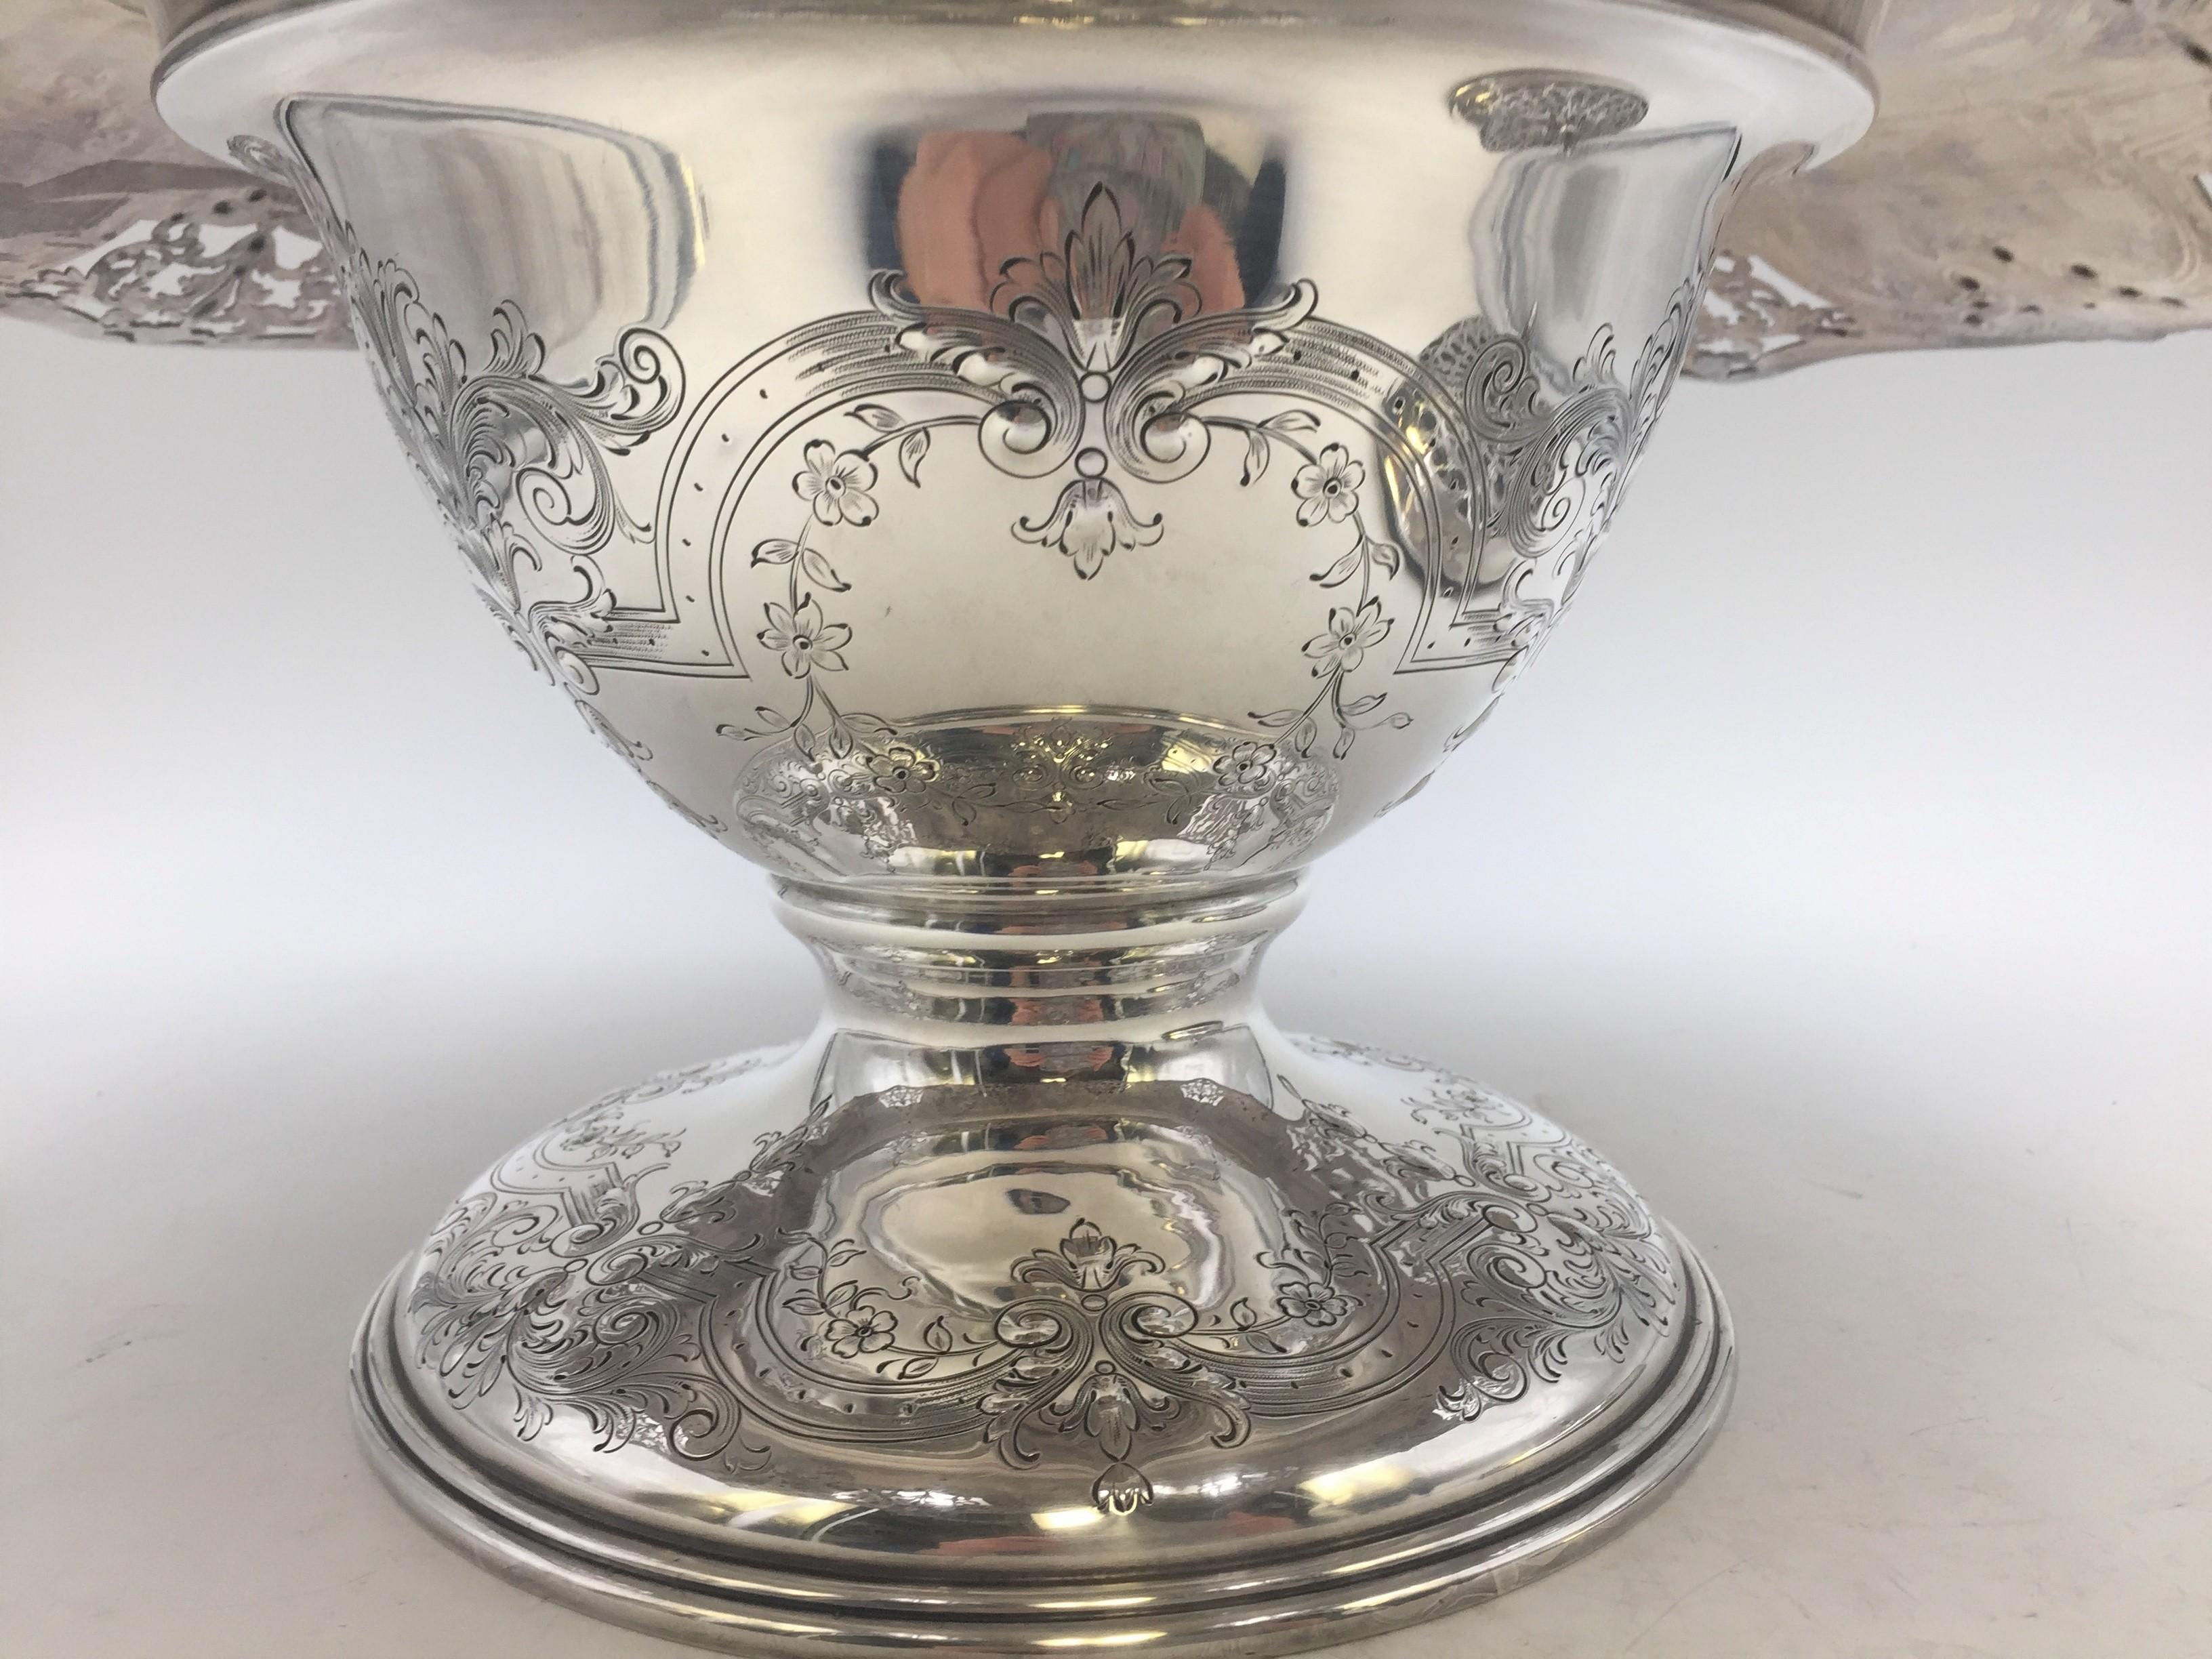 Graff, Washbourne &Dunn Sterling Silver Rose Bowl Centerpiece Early 20th Century For Sale 1